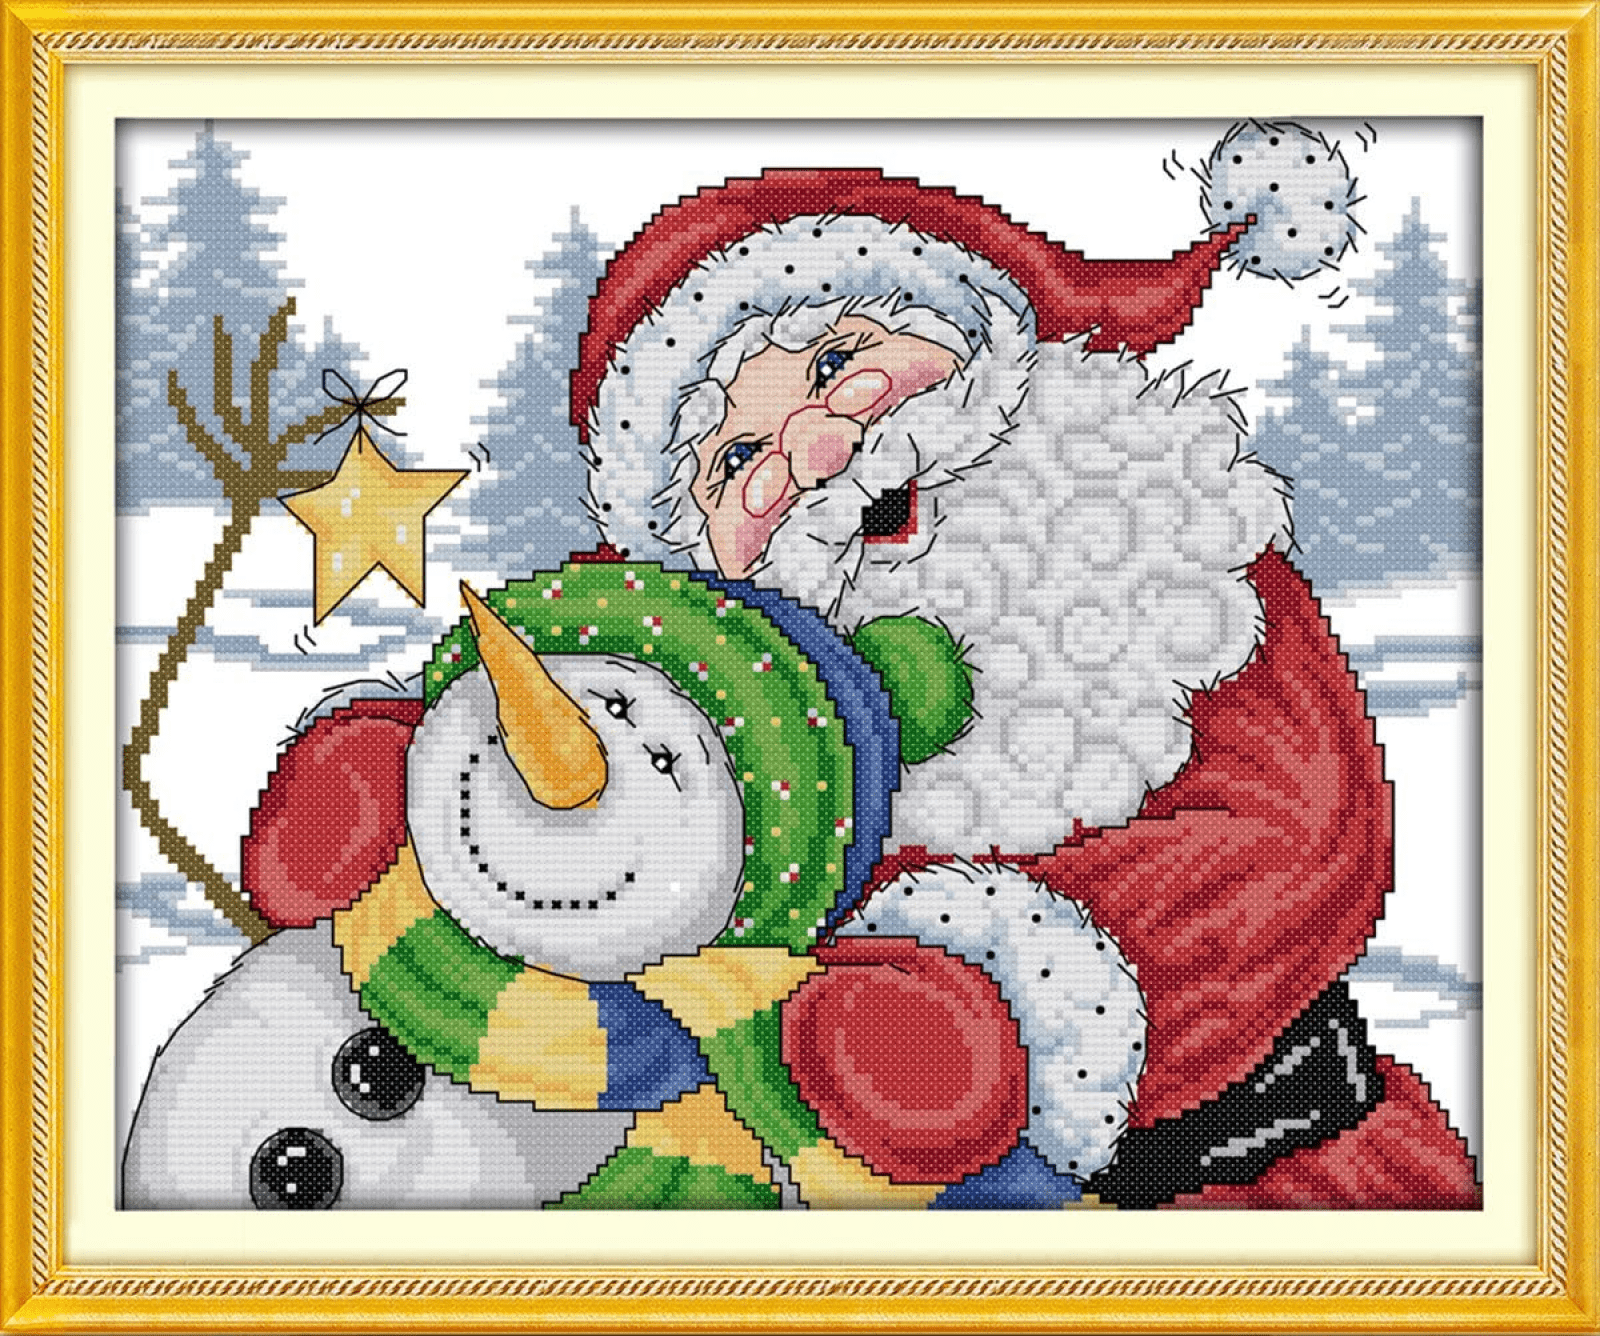 Cross Stitch Stamped Kits 11CT 9X11 inch Pre-Printed Cross-Stitching  Starter Patterns for Beginner Kids or Adults Embroidery Needlepoint Kits  Santa Claus Christmas Deer Christmas Deer 9x11 Inch